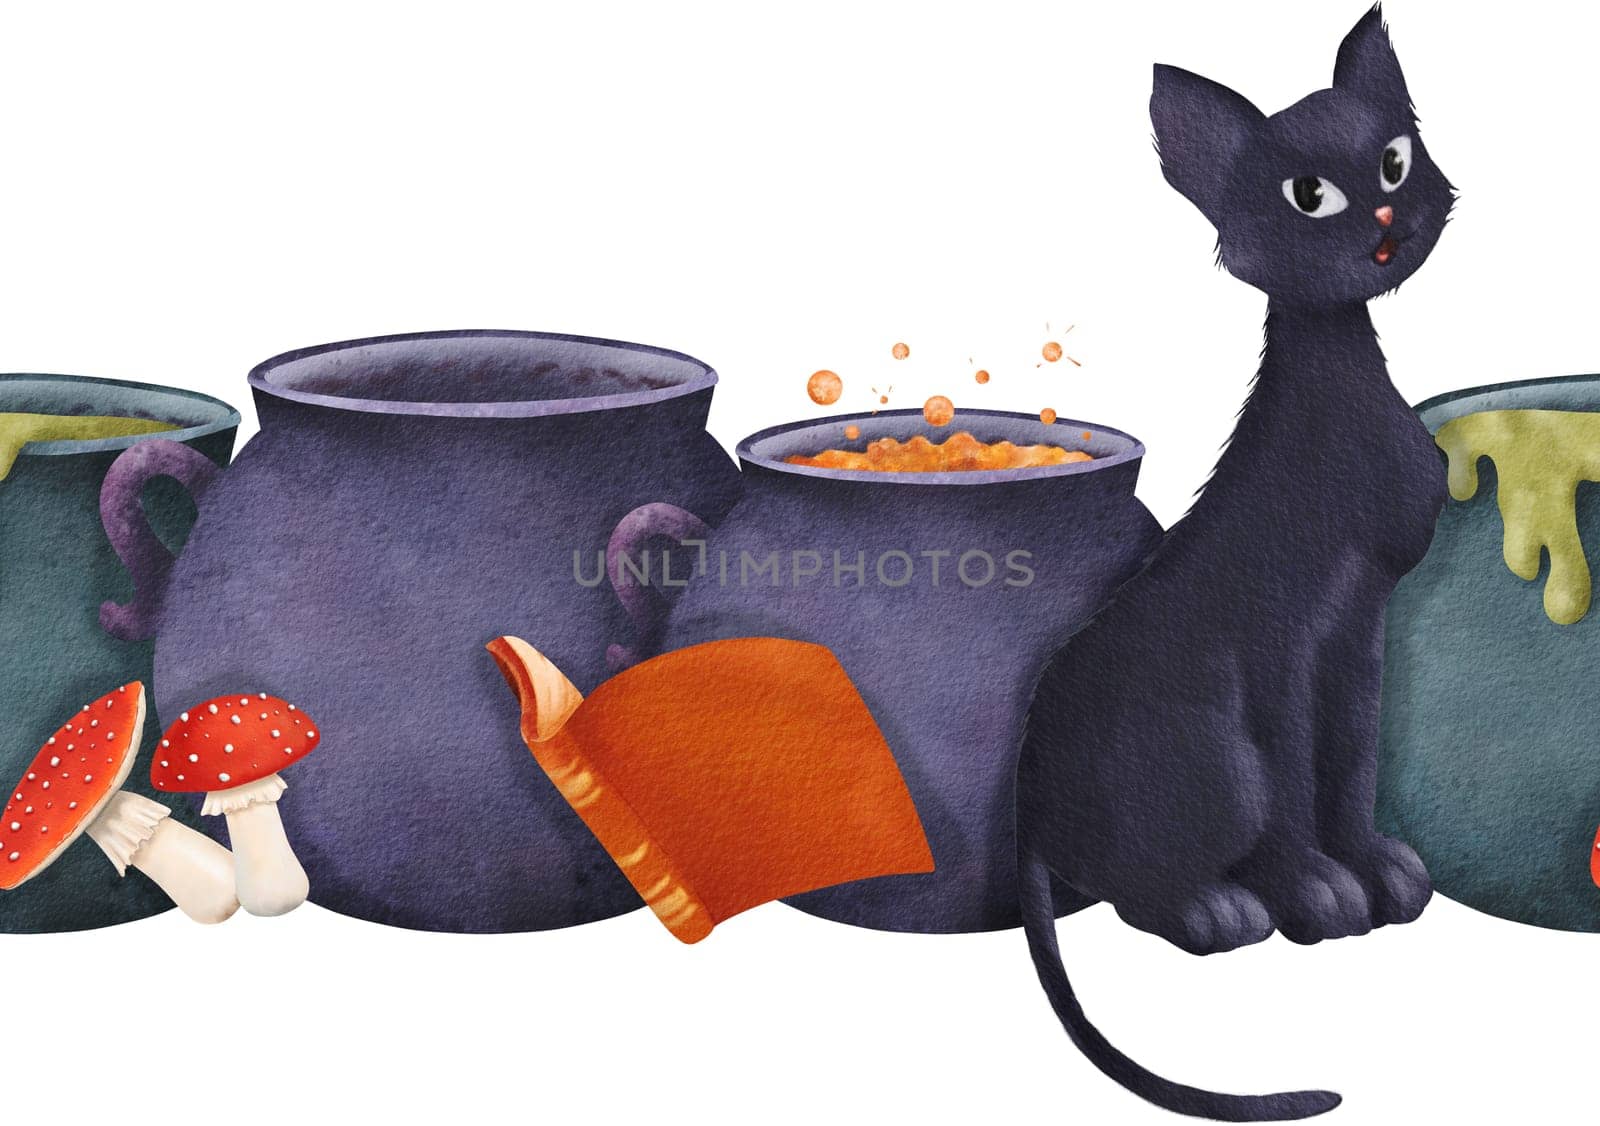 Seamless Halloween border. cauldrons with potions, magical spell books, poisonous fly agaric mushrooms a black witch's cat. Classic holiday elements in a watercolor illustration. for website and cards by Art_Mari_Ka